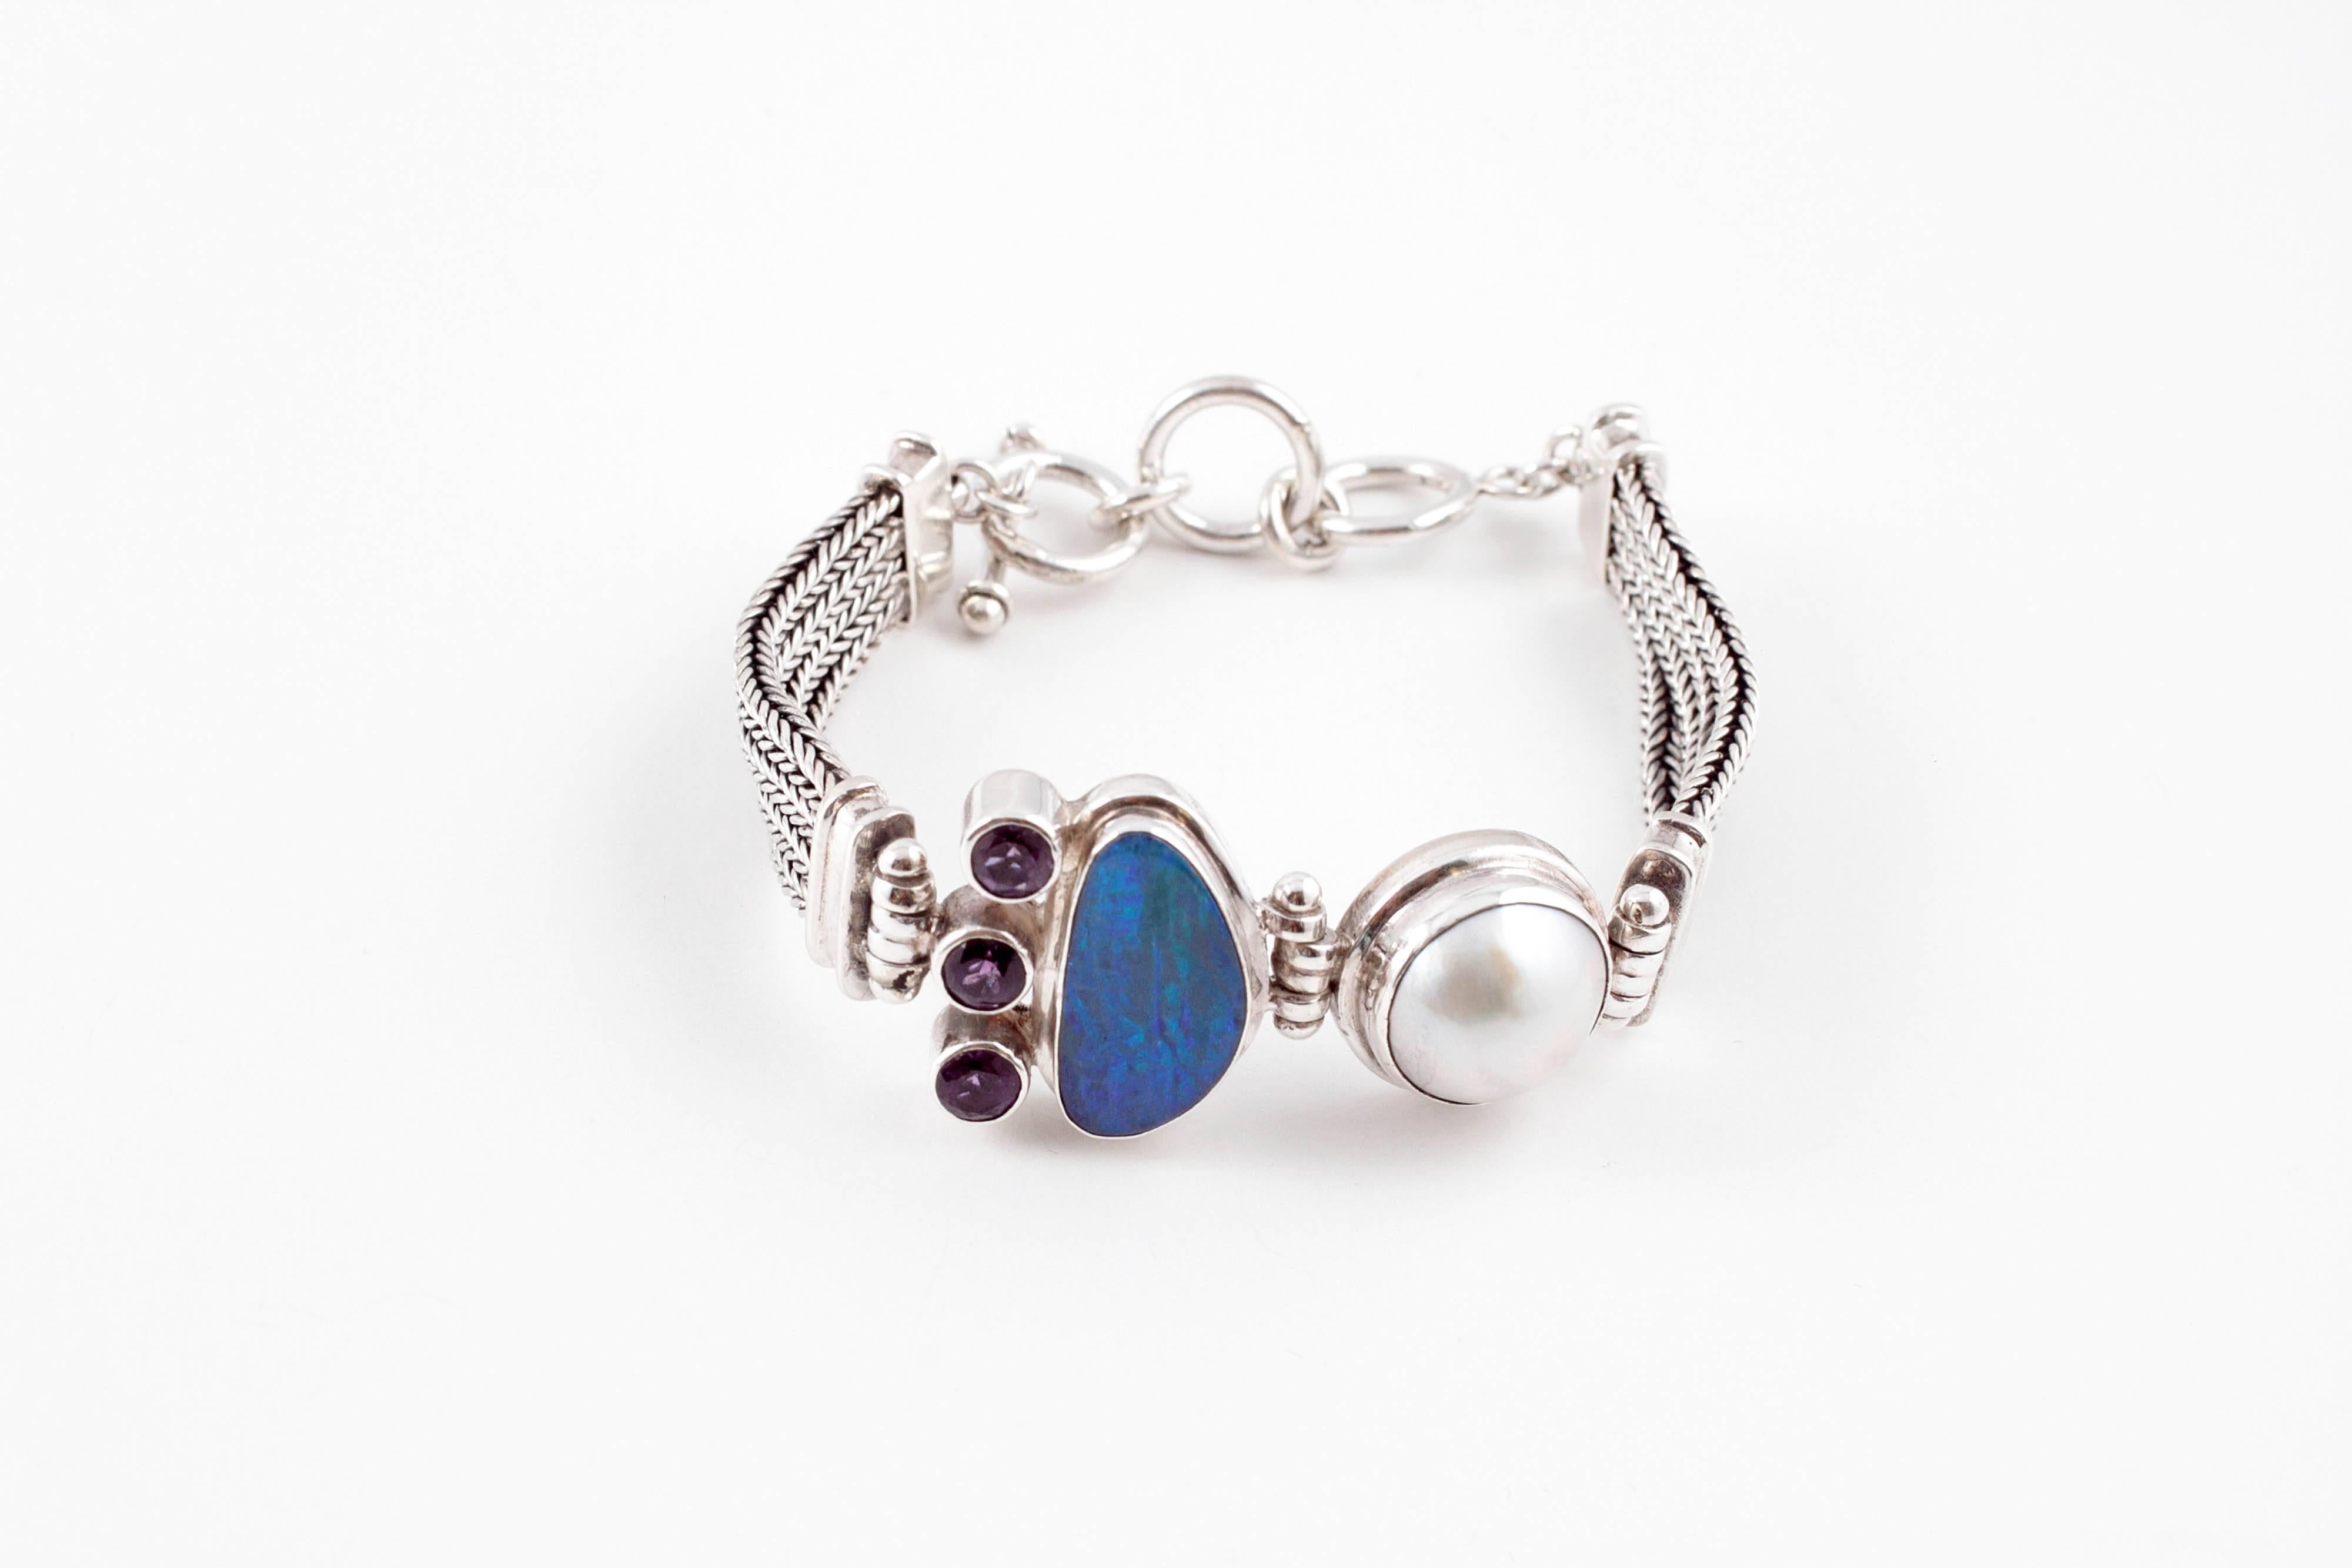 Delightful Sterling Silver bracelet featuring opal, amethyst, and mabe pearl.  8 inches.